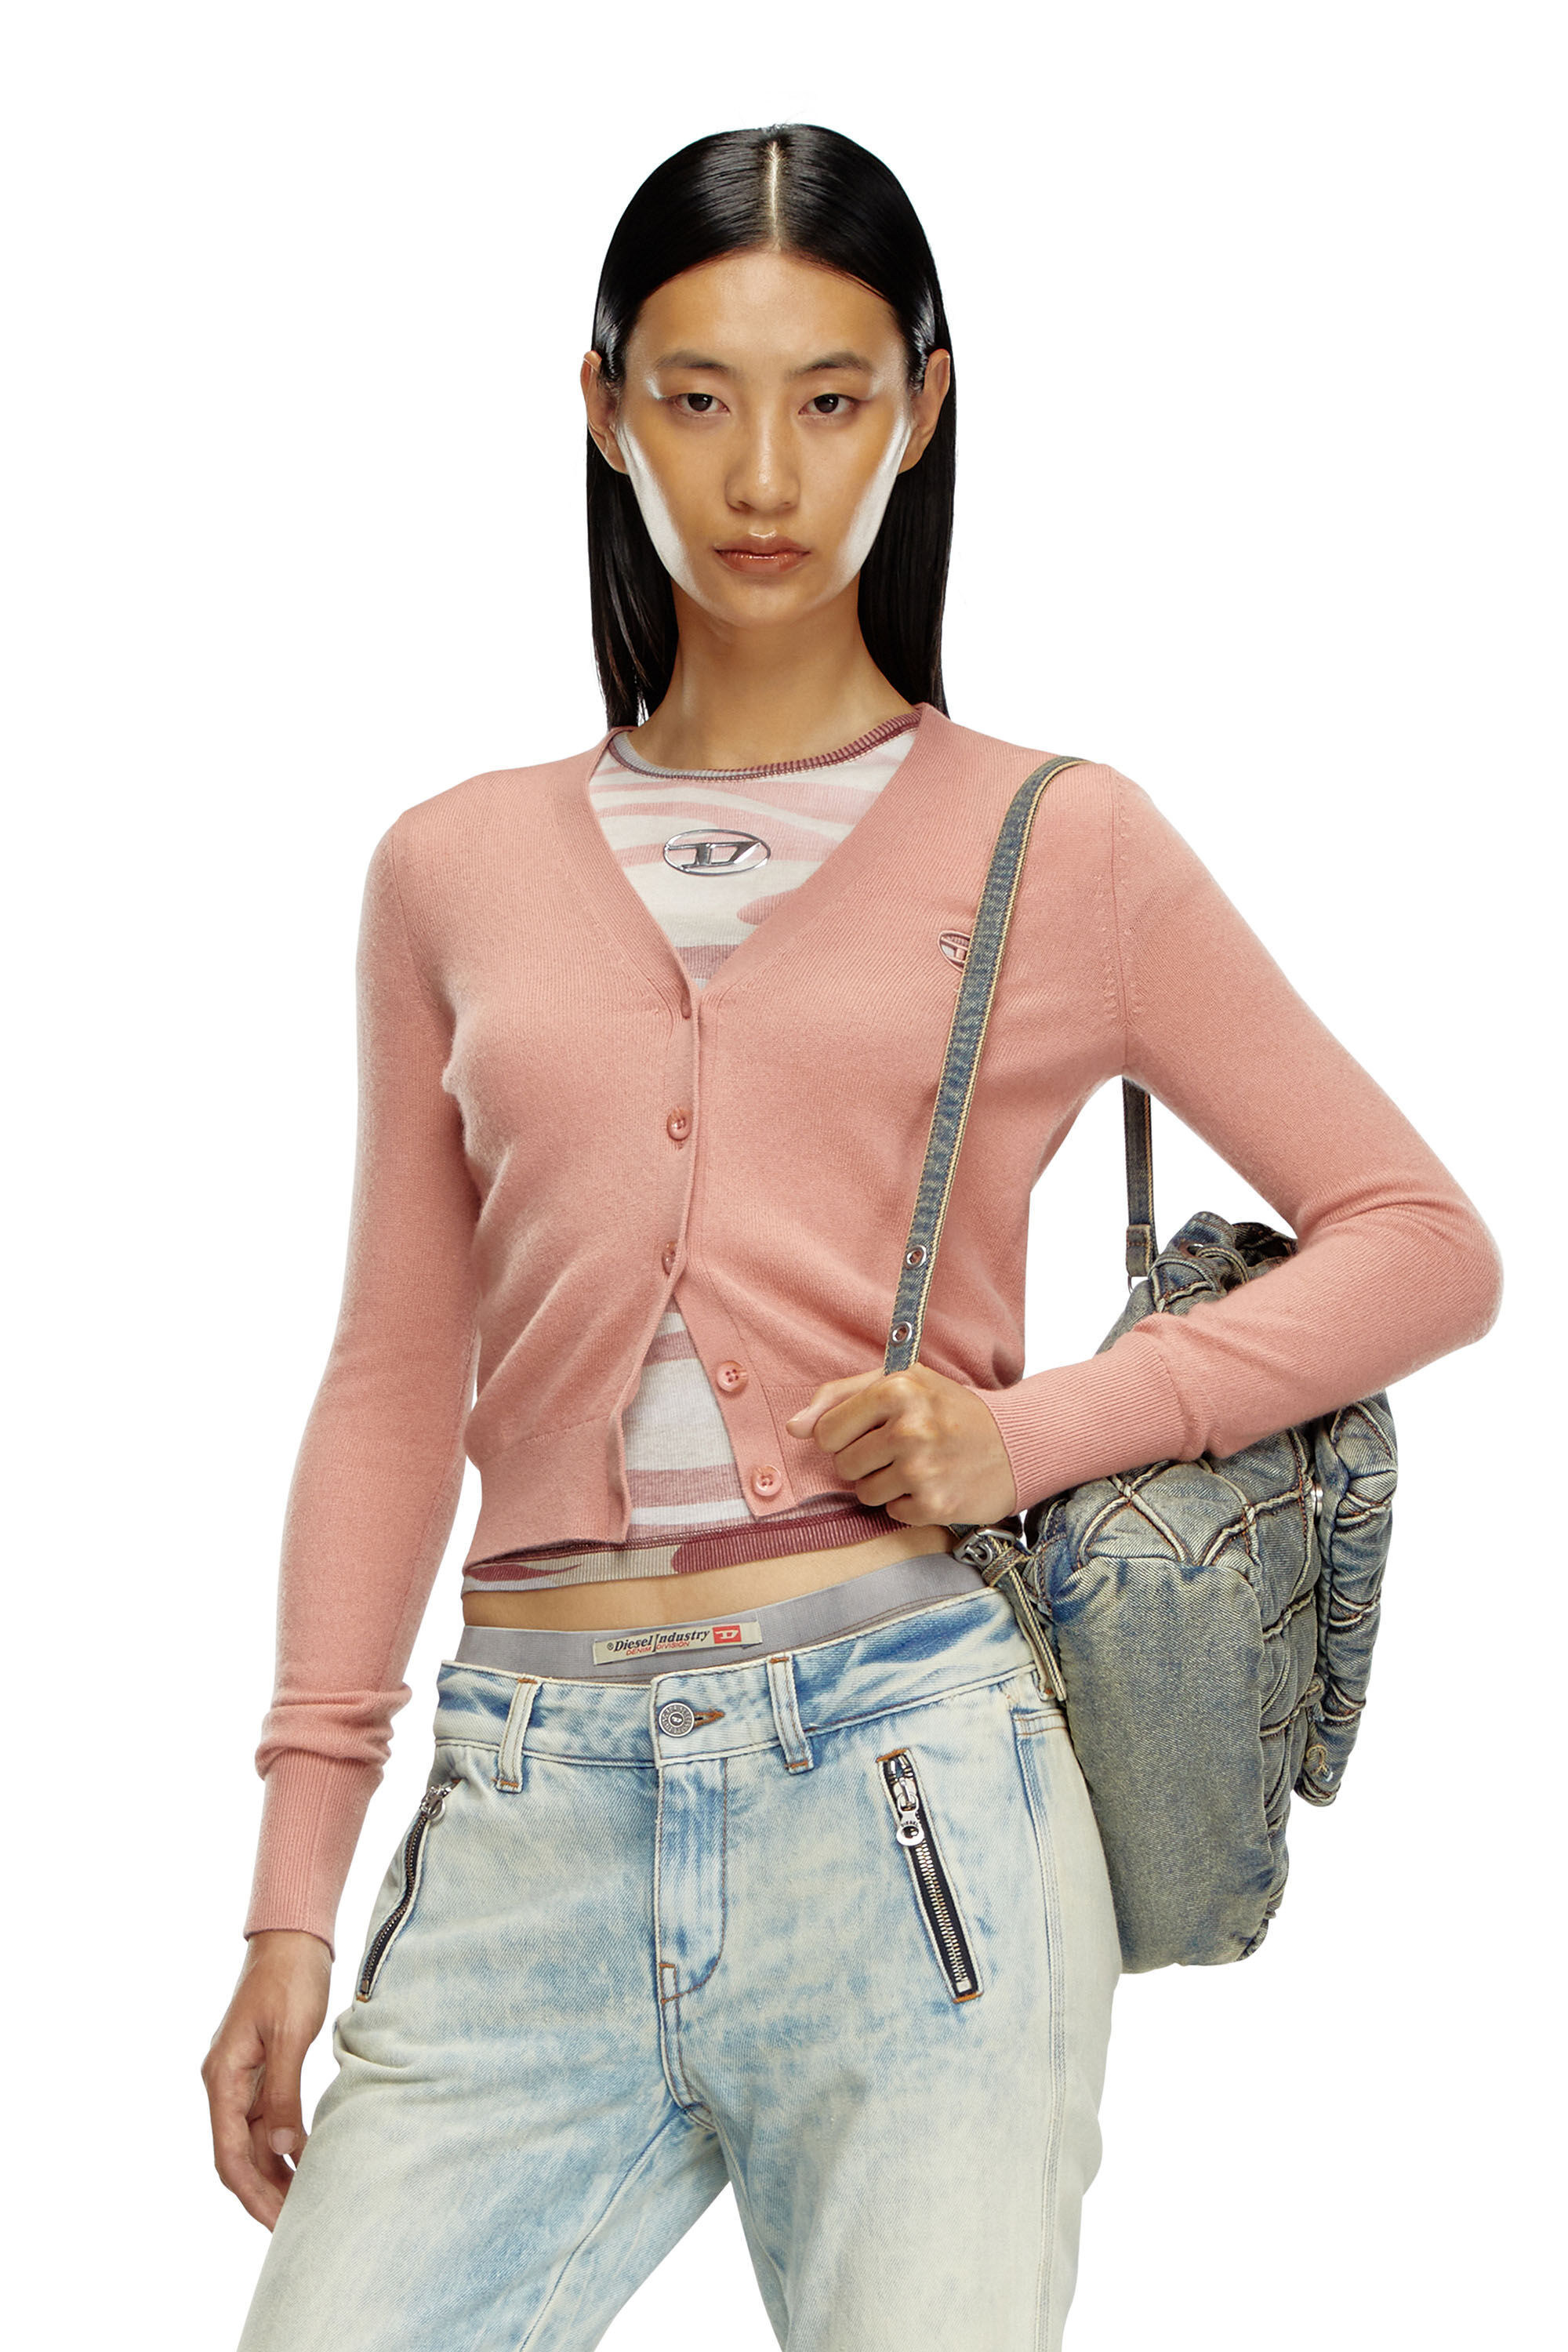 Diesel - M-ARTE, Woman Wool and cashmere cardigan in Pink - Image 3